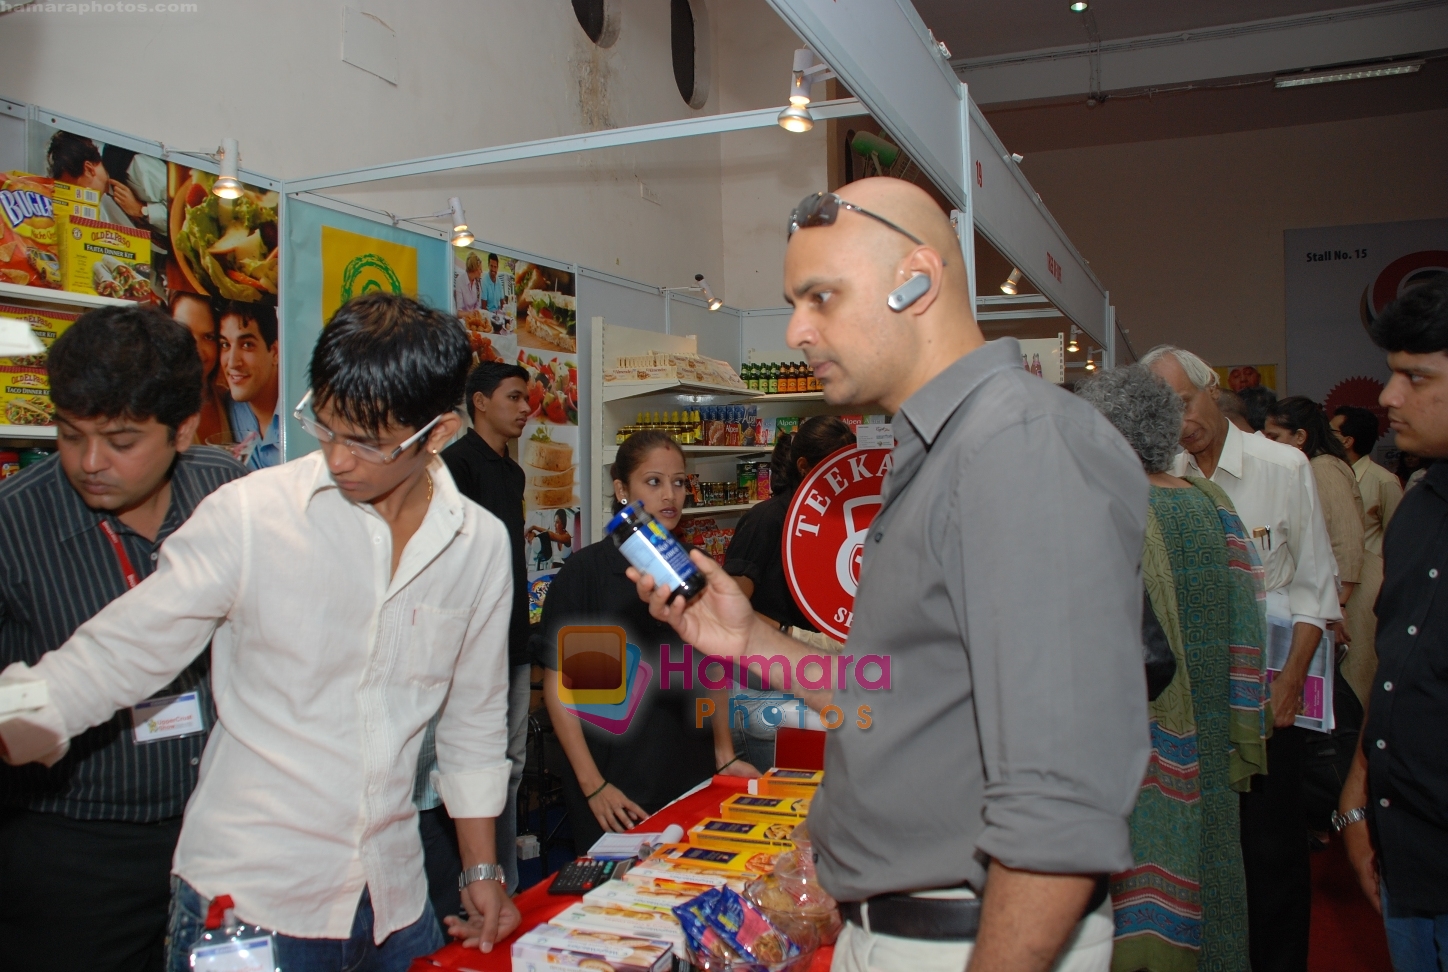 Rajiv Samant buys something from the exhibition at the launch of the 7th annual UpperCrust Show in Mumbai on 4th Dec 2009